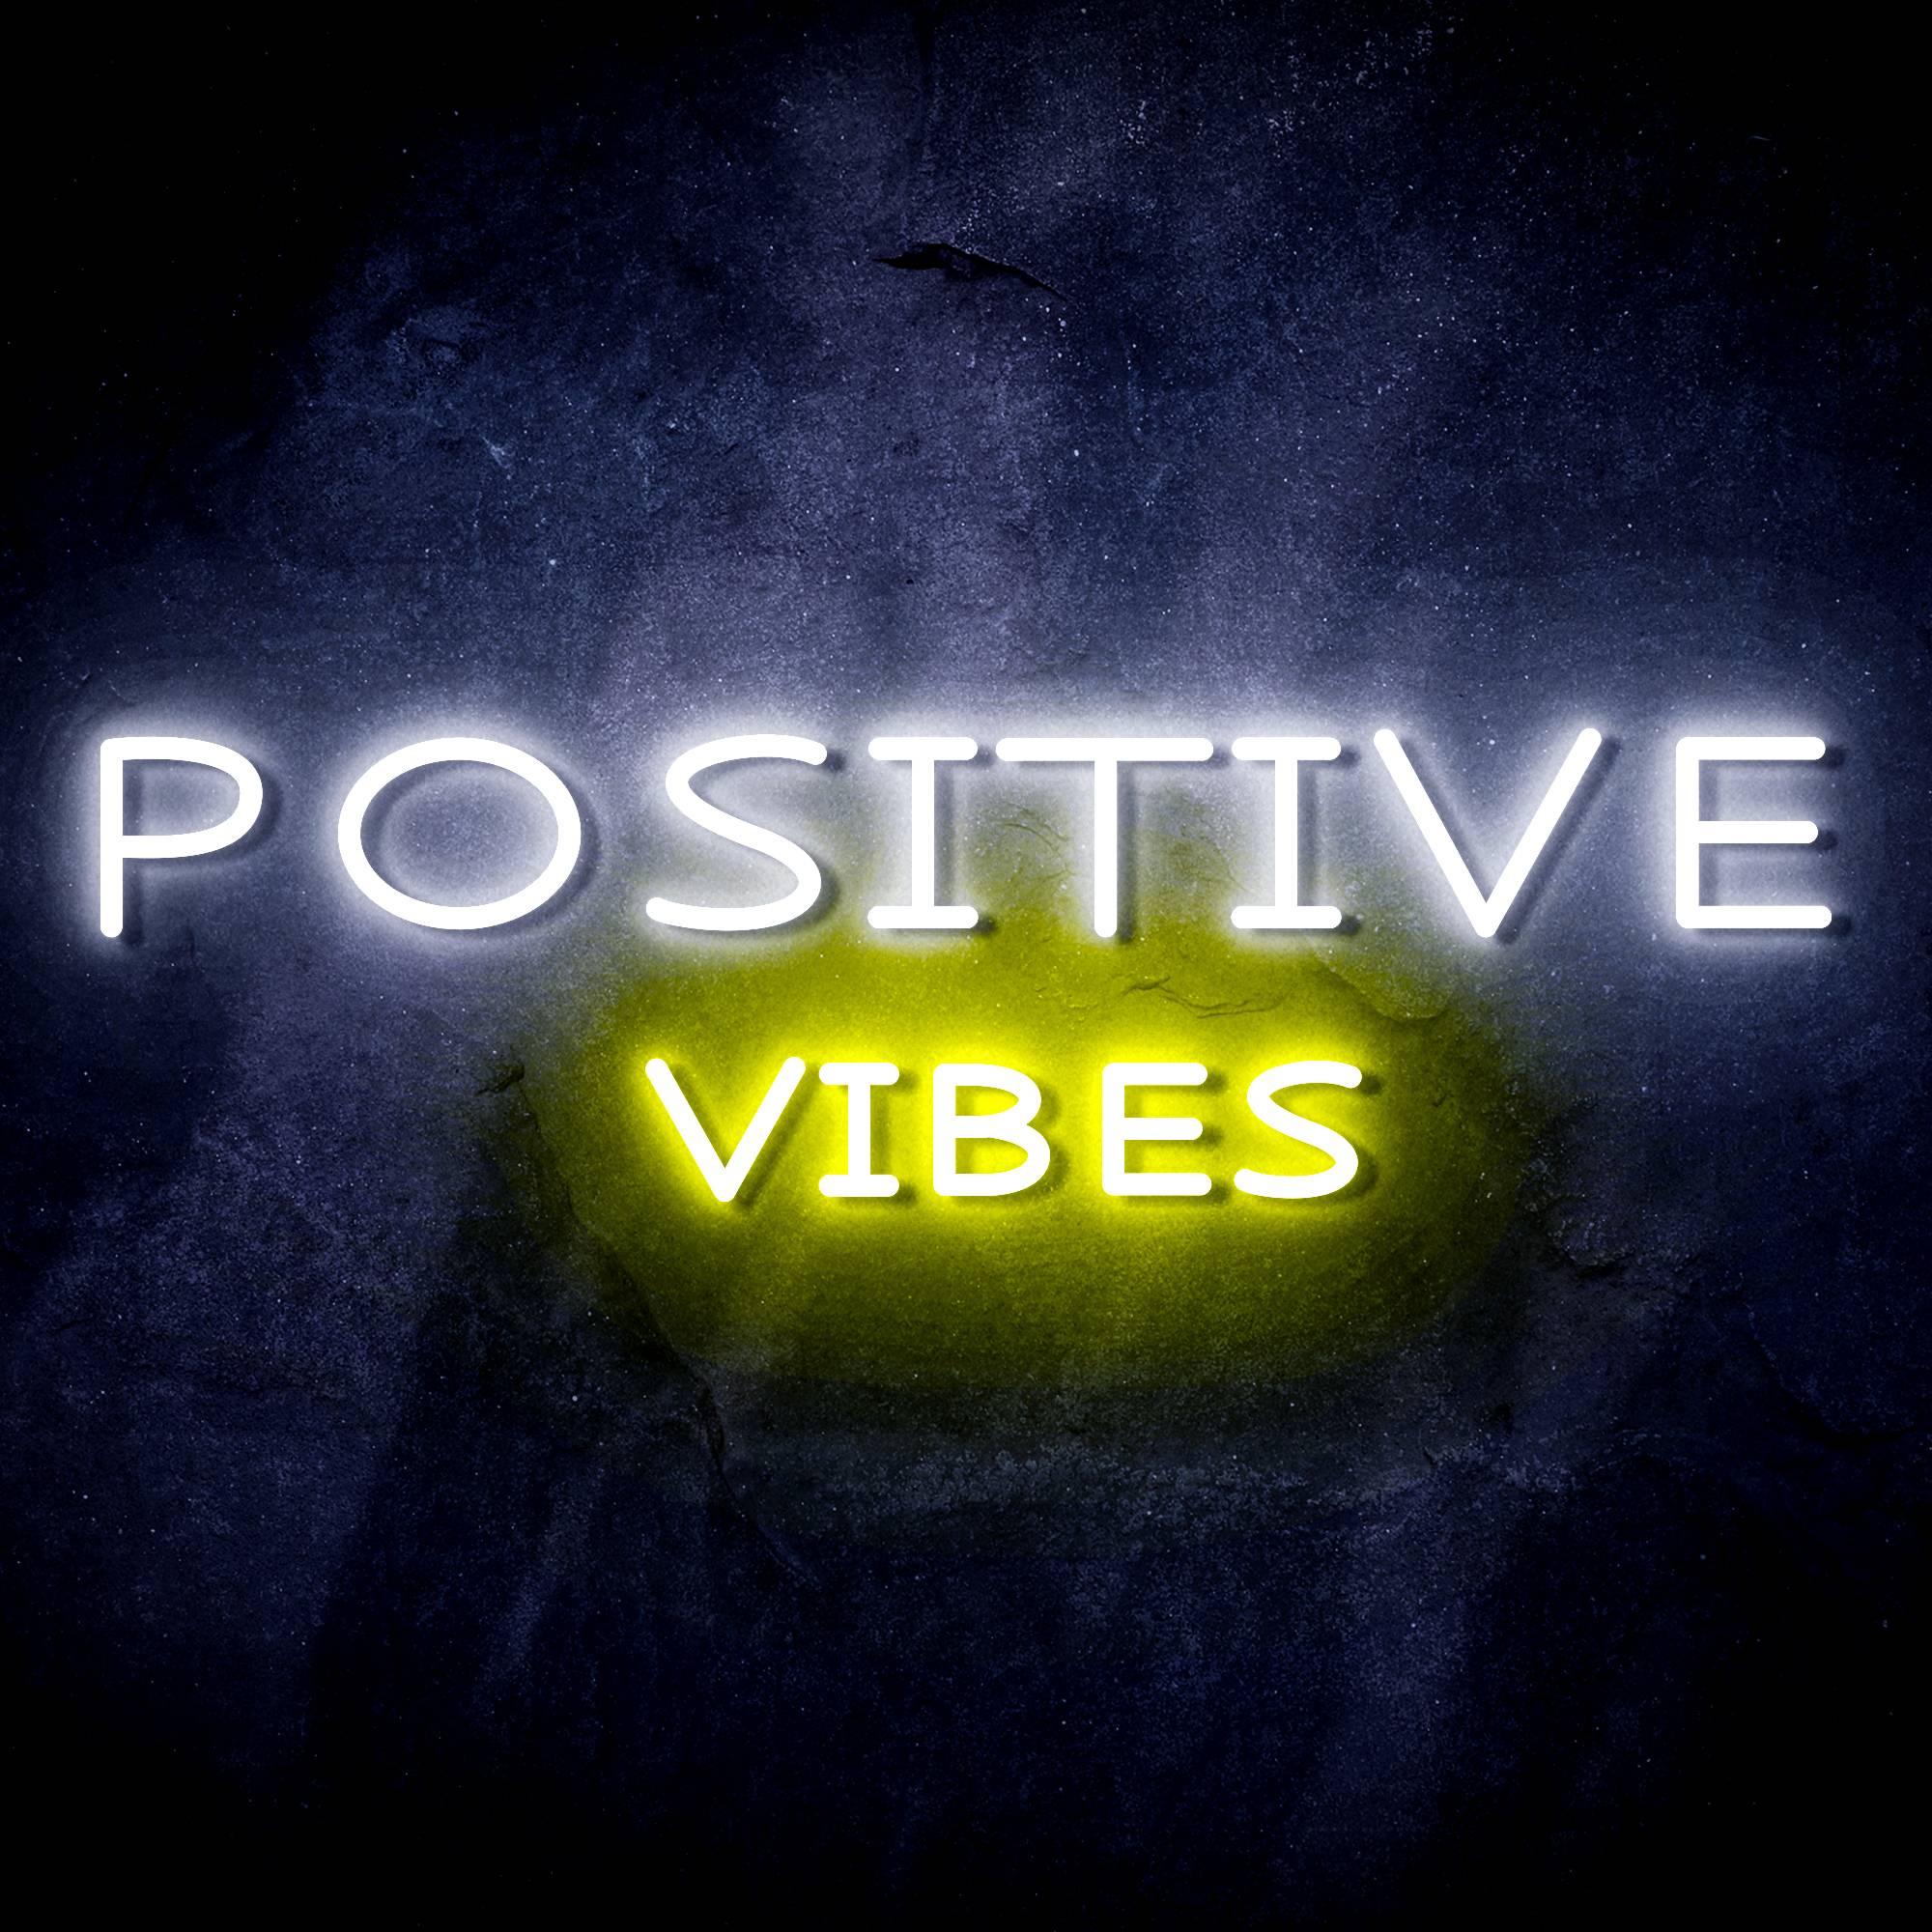 "POSITIVE VIBES" Text Quote LED Neon Sign